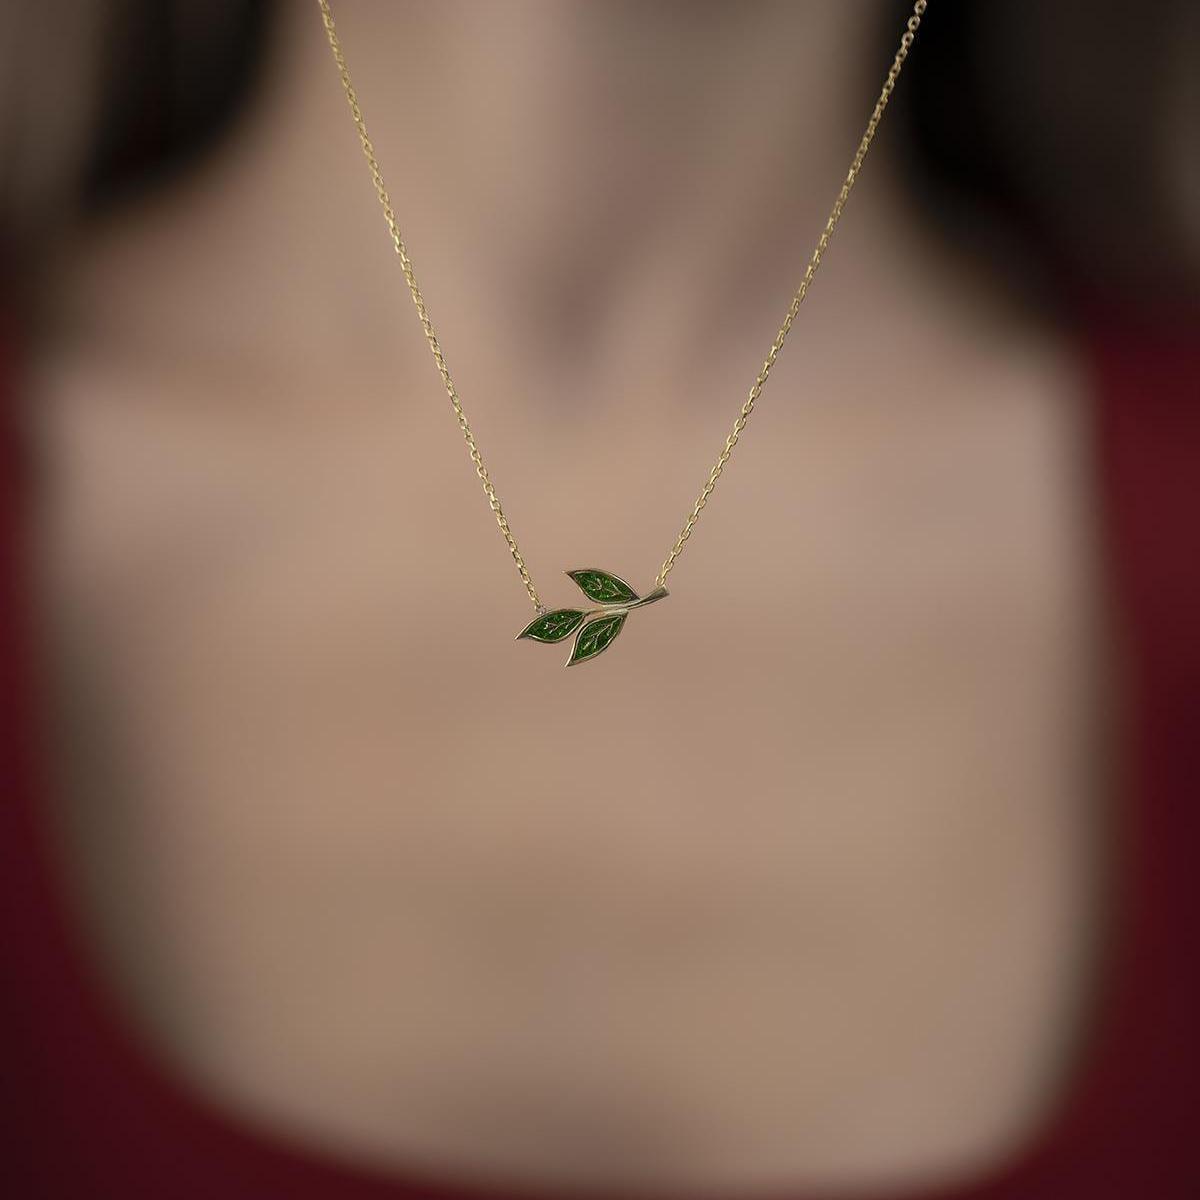 Leaf Pendant Necklace With Zircon • April Birthstone Leaf Necklace - Trending Silver Gifts